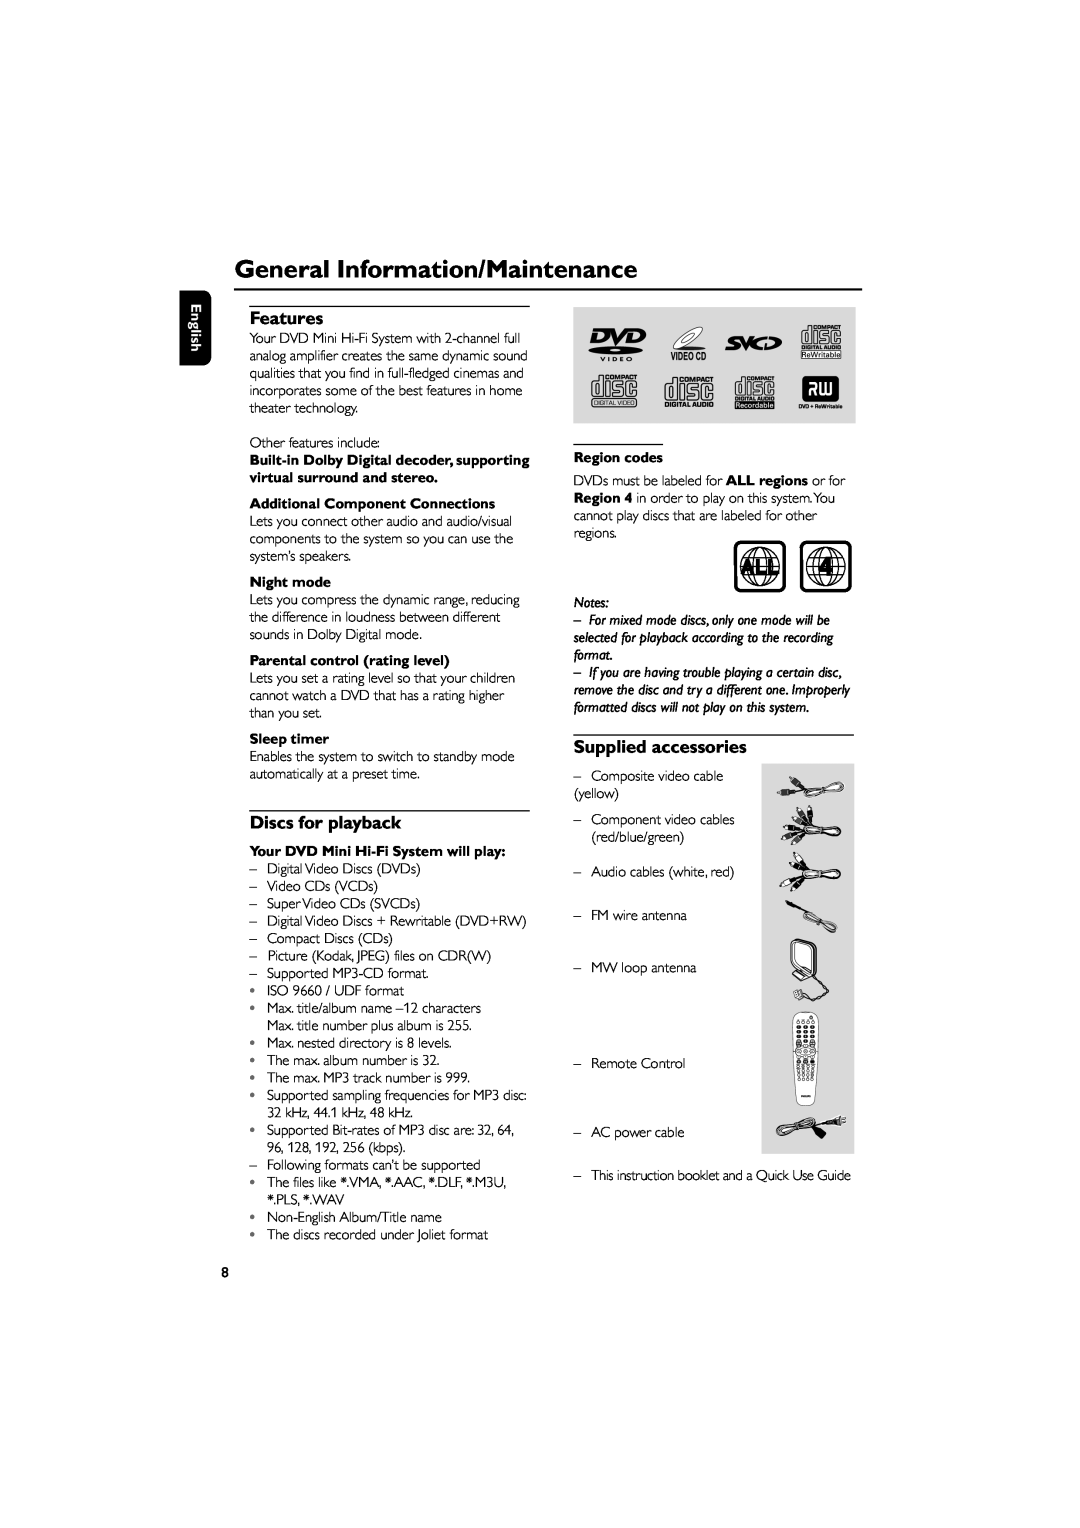 Philips FWD182 General Information/Maintenance, English, Additional Component Connections, Night mode, Sleep timer 